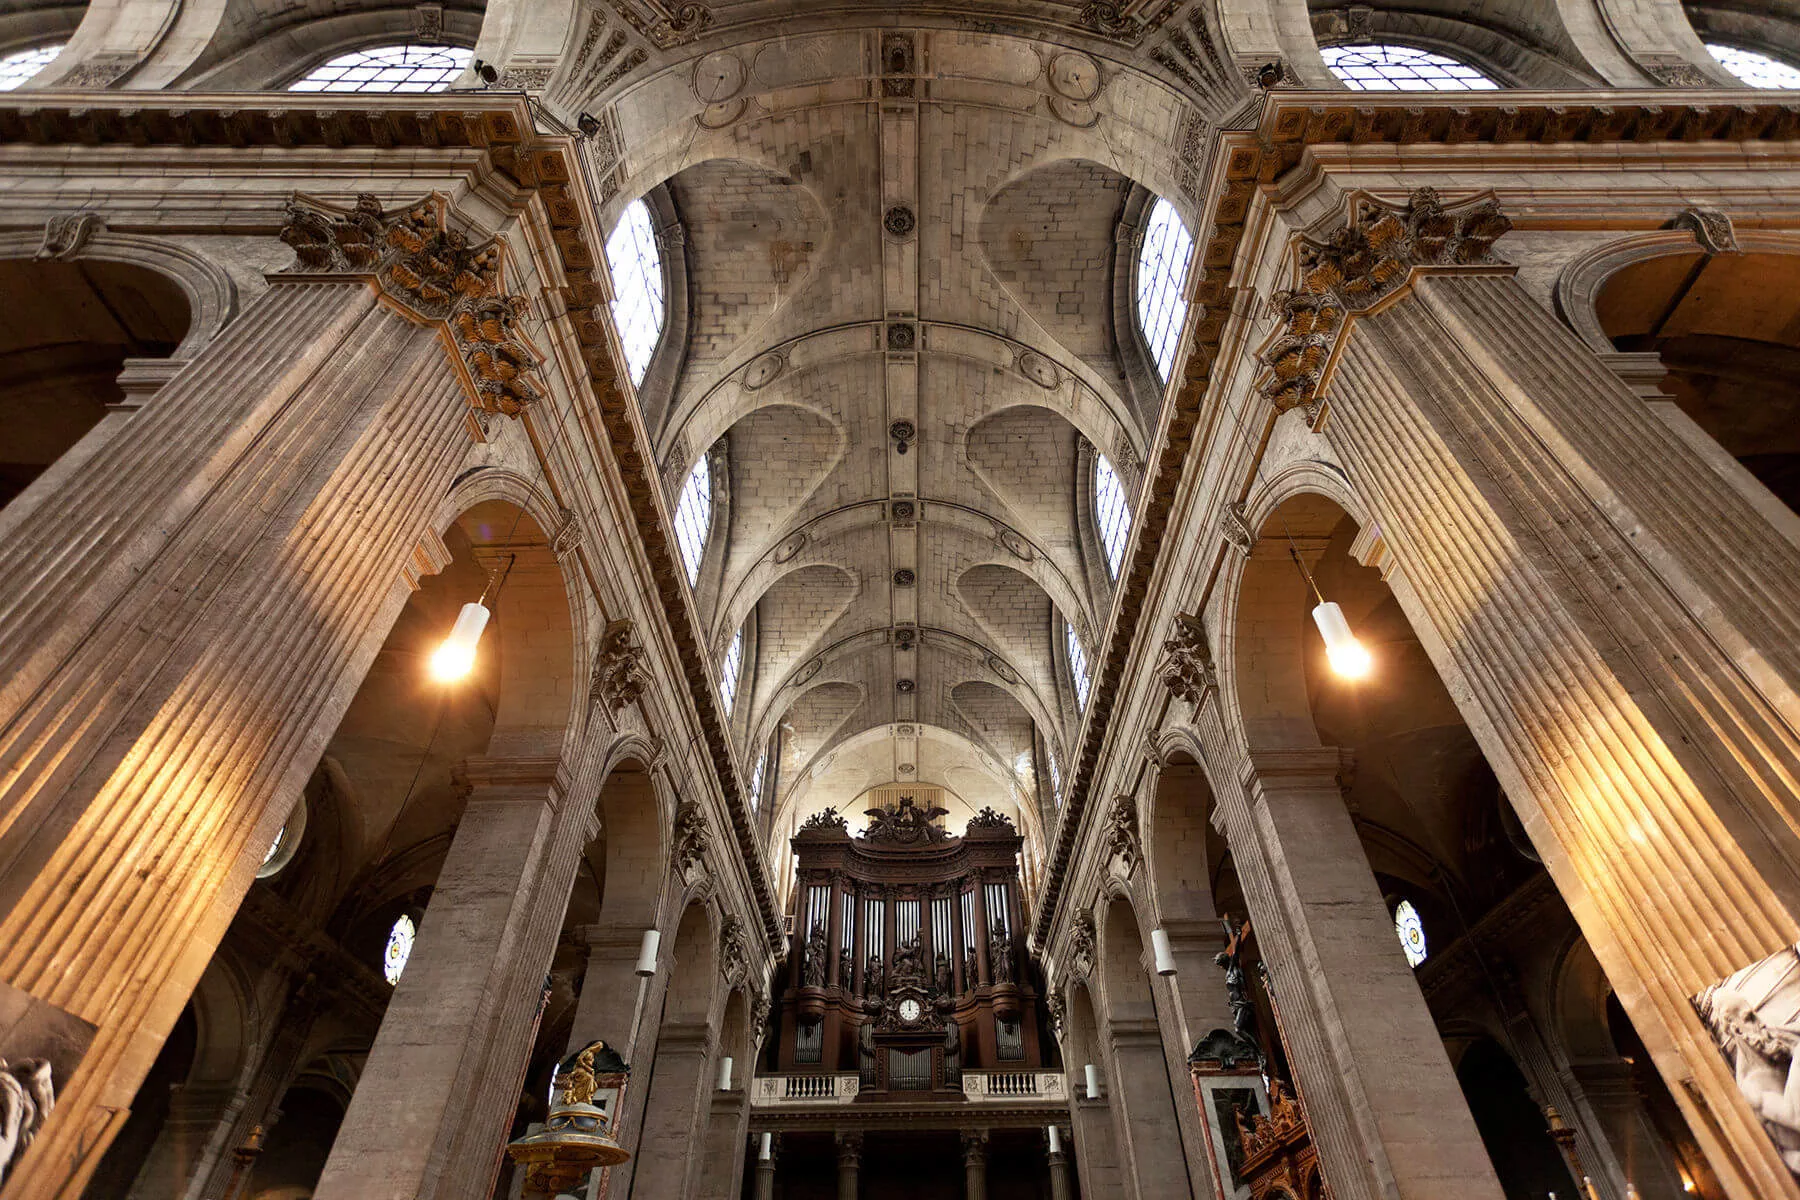 You can hear Paris' St. Sulpice Church pipe organ during free recitals on Sundays after Mass